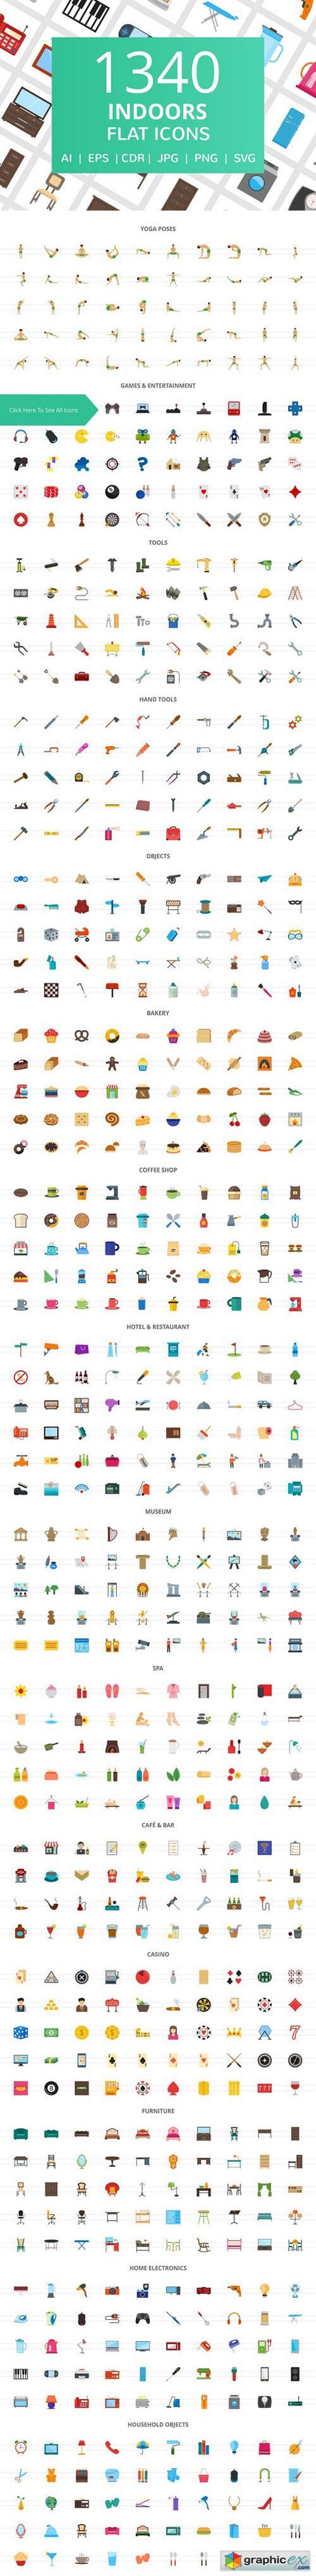 1340 Indoors Flat Icons